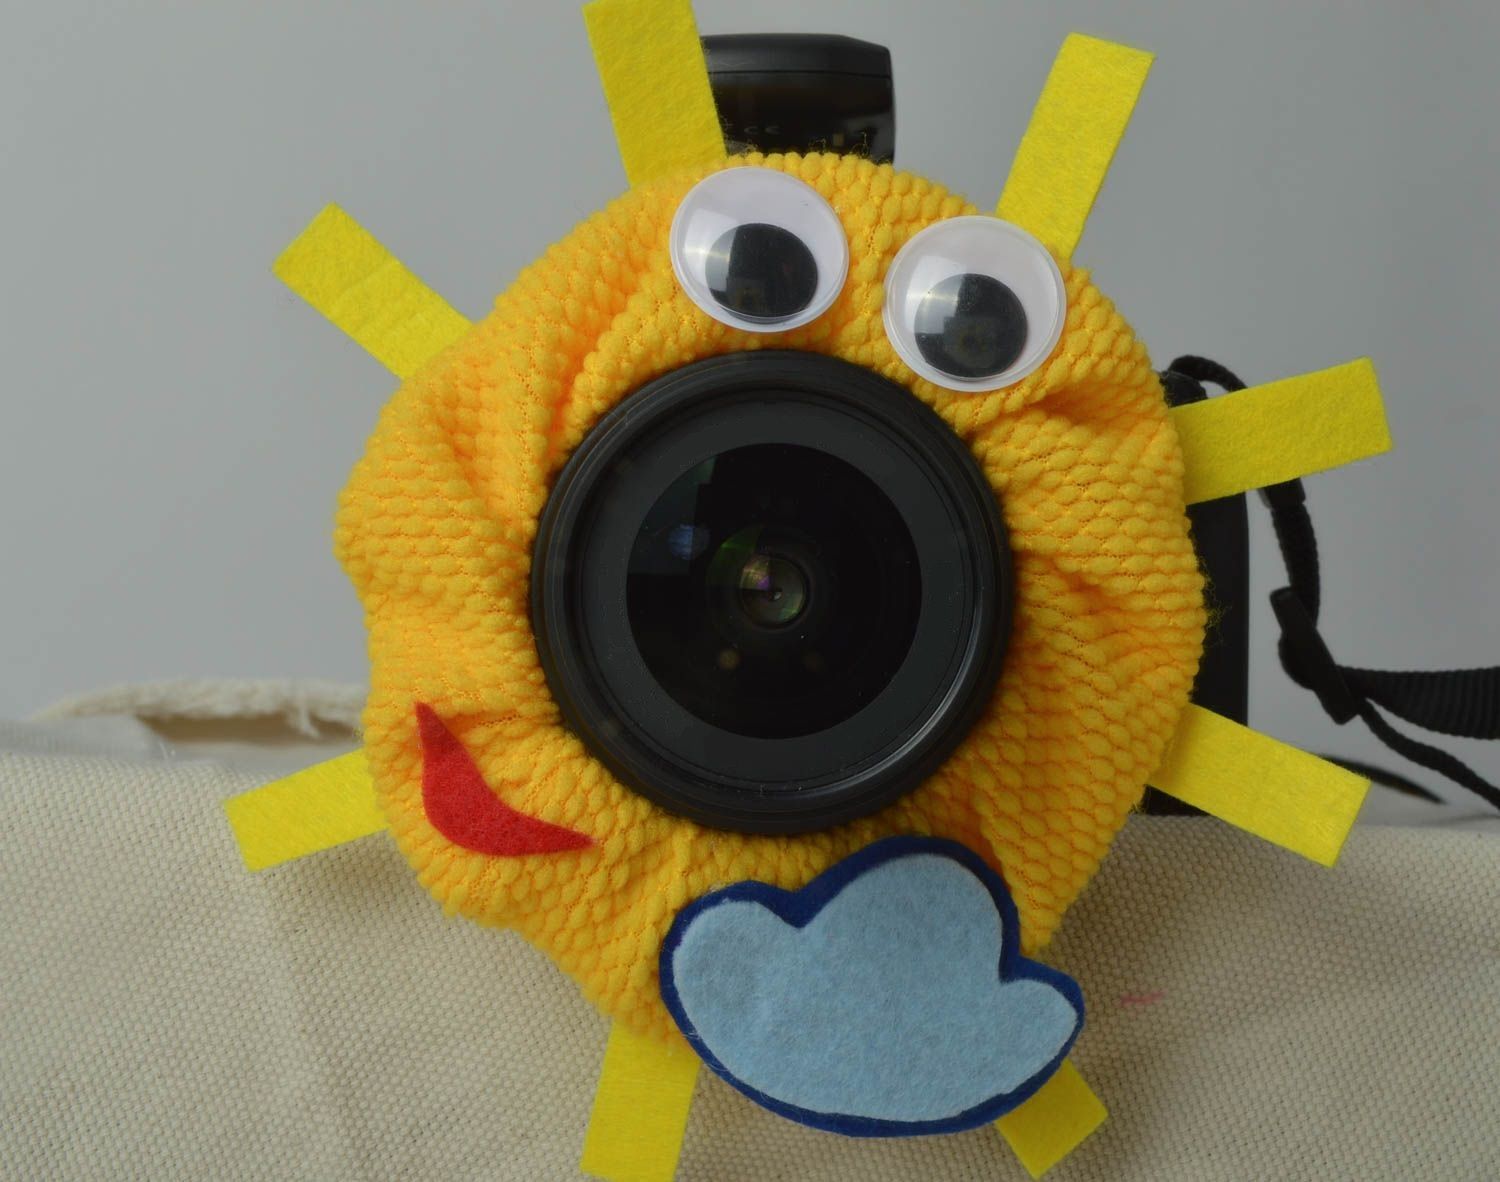 Handmade bright toy for camera lens stylish decor for camera unusual toy photo 1